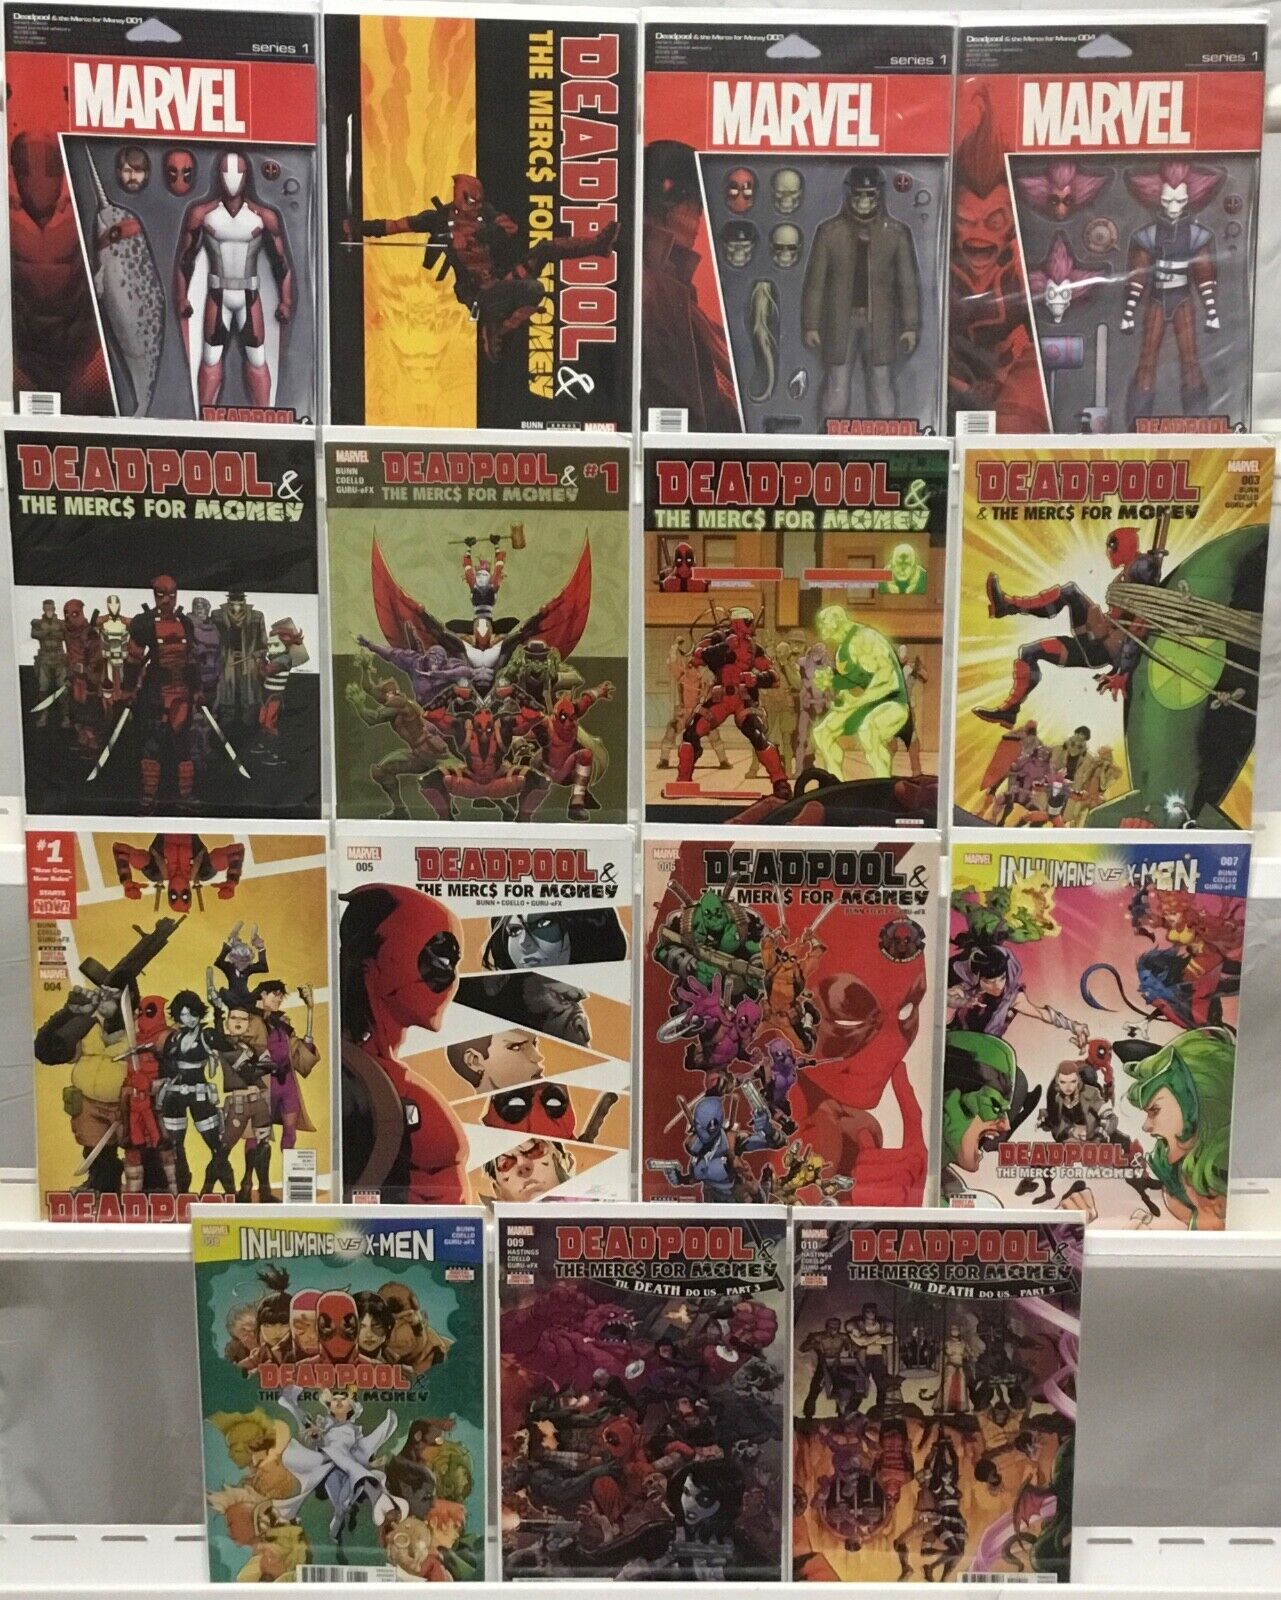 Marvel Comics Deadpool & the Mercs For Money 1st and 2nd Series Complete Sets